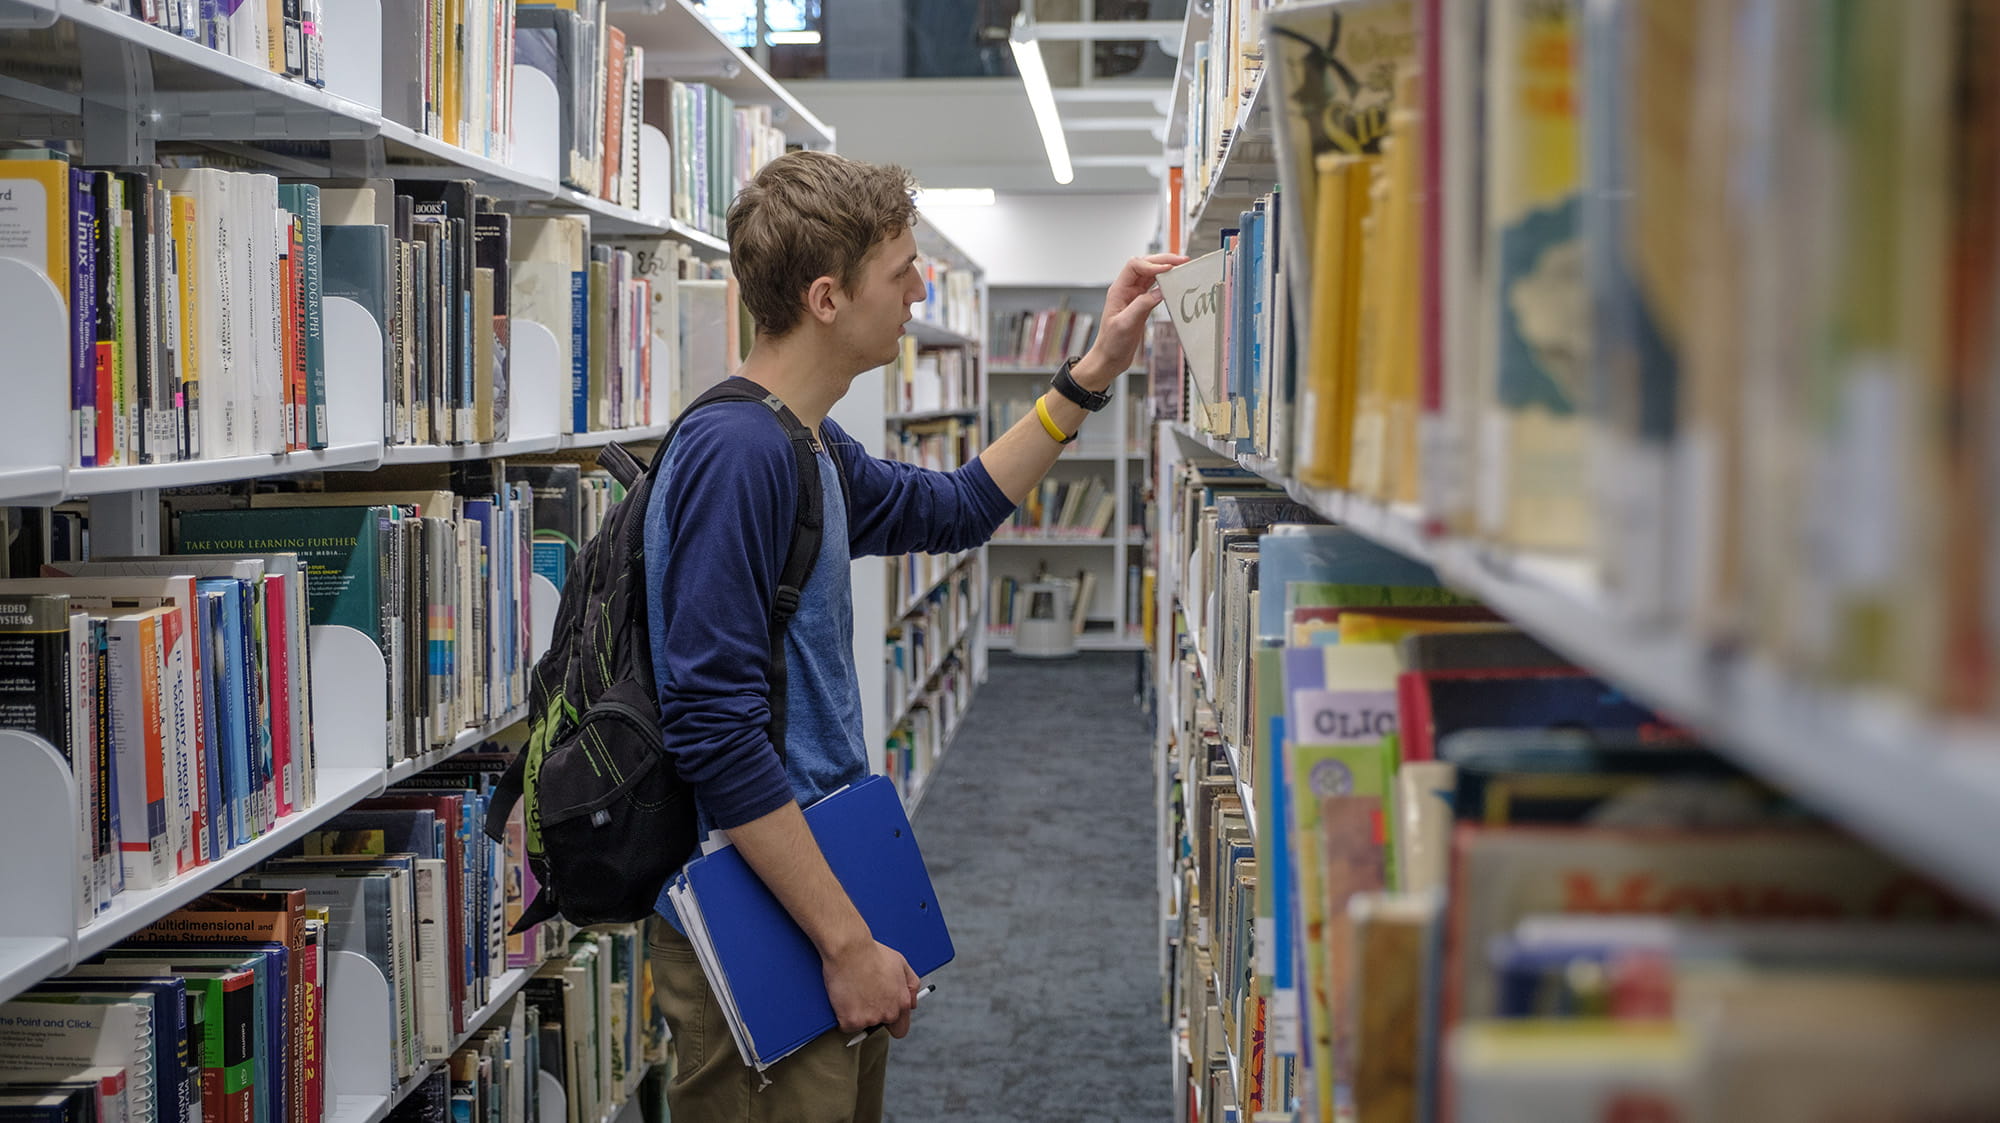 A student selecting a book off the shelf in the library